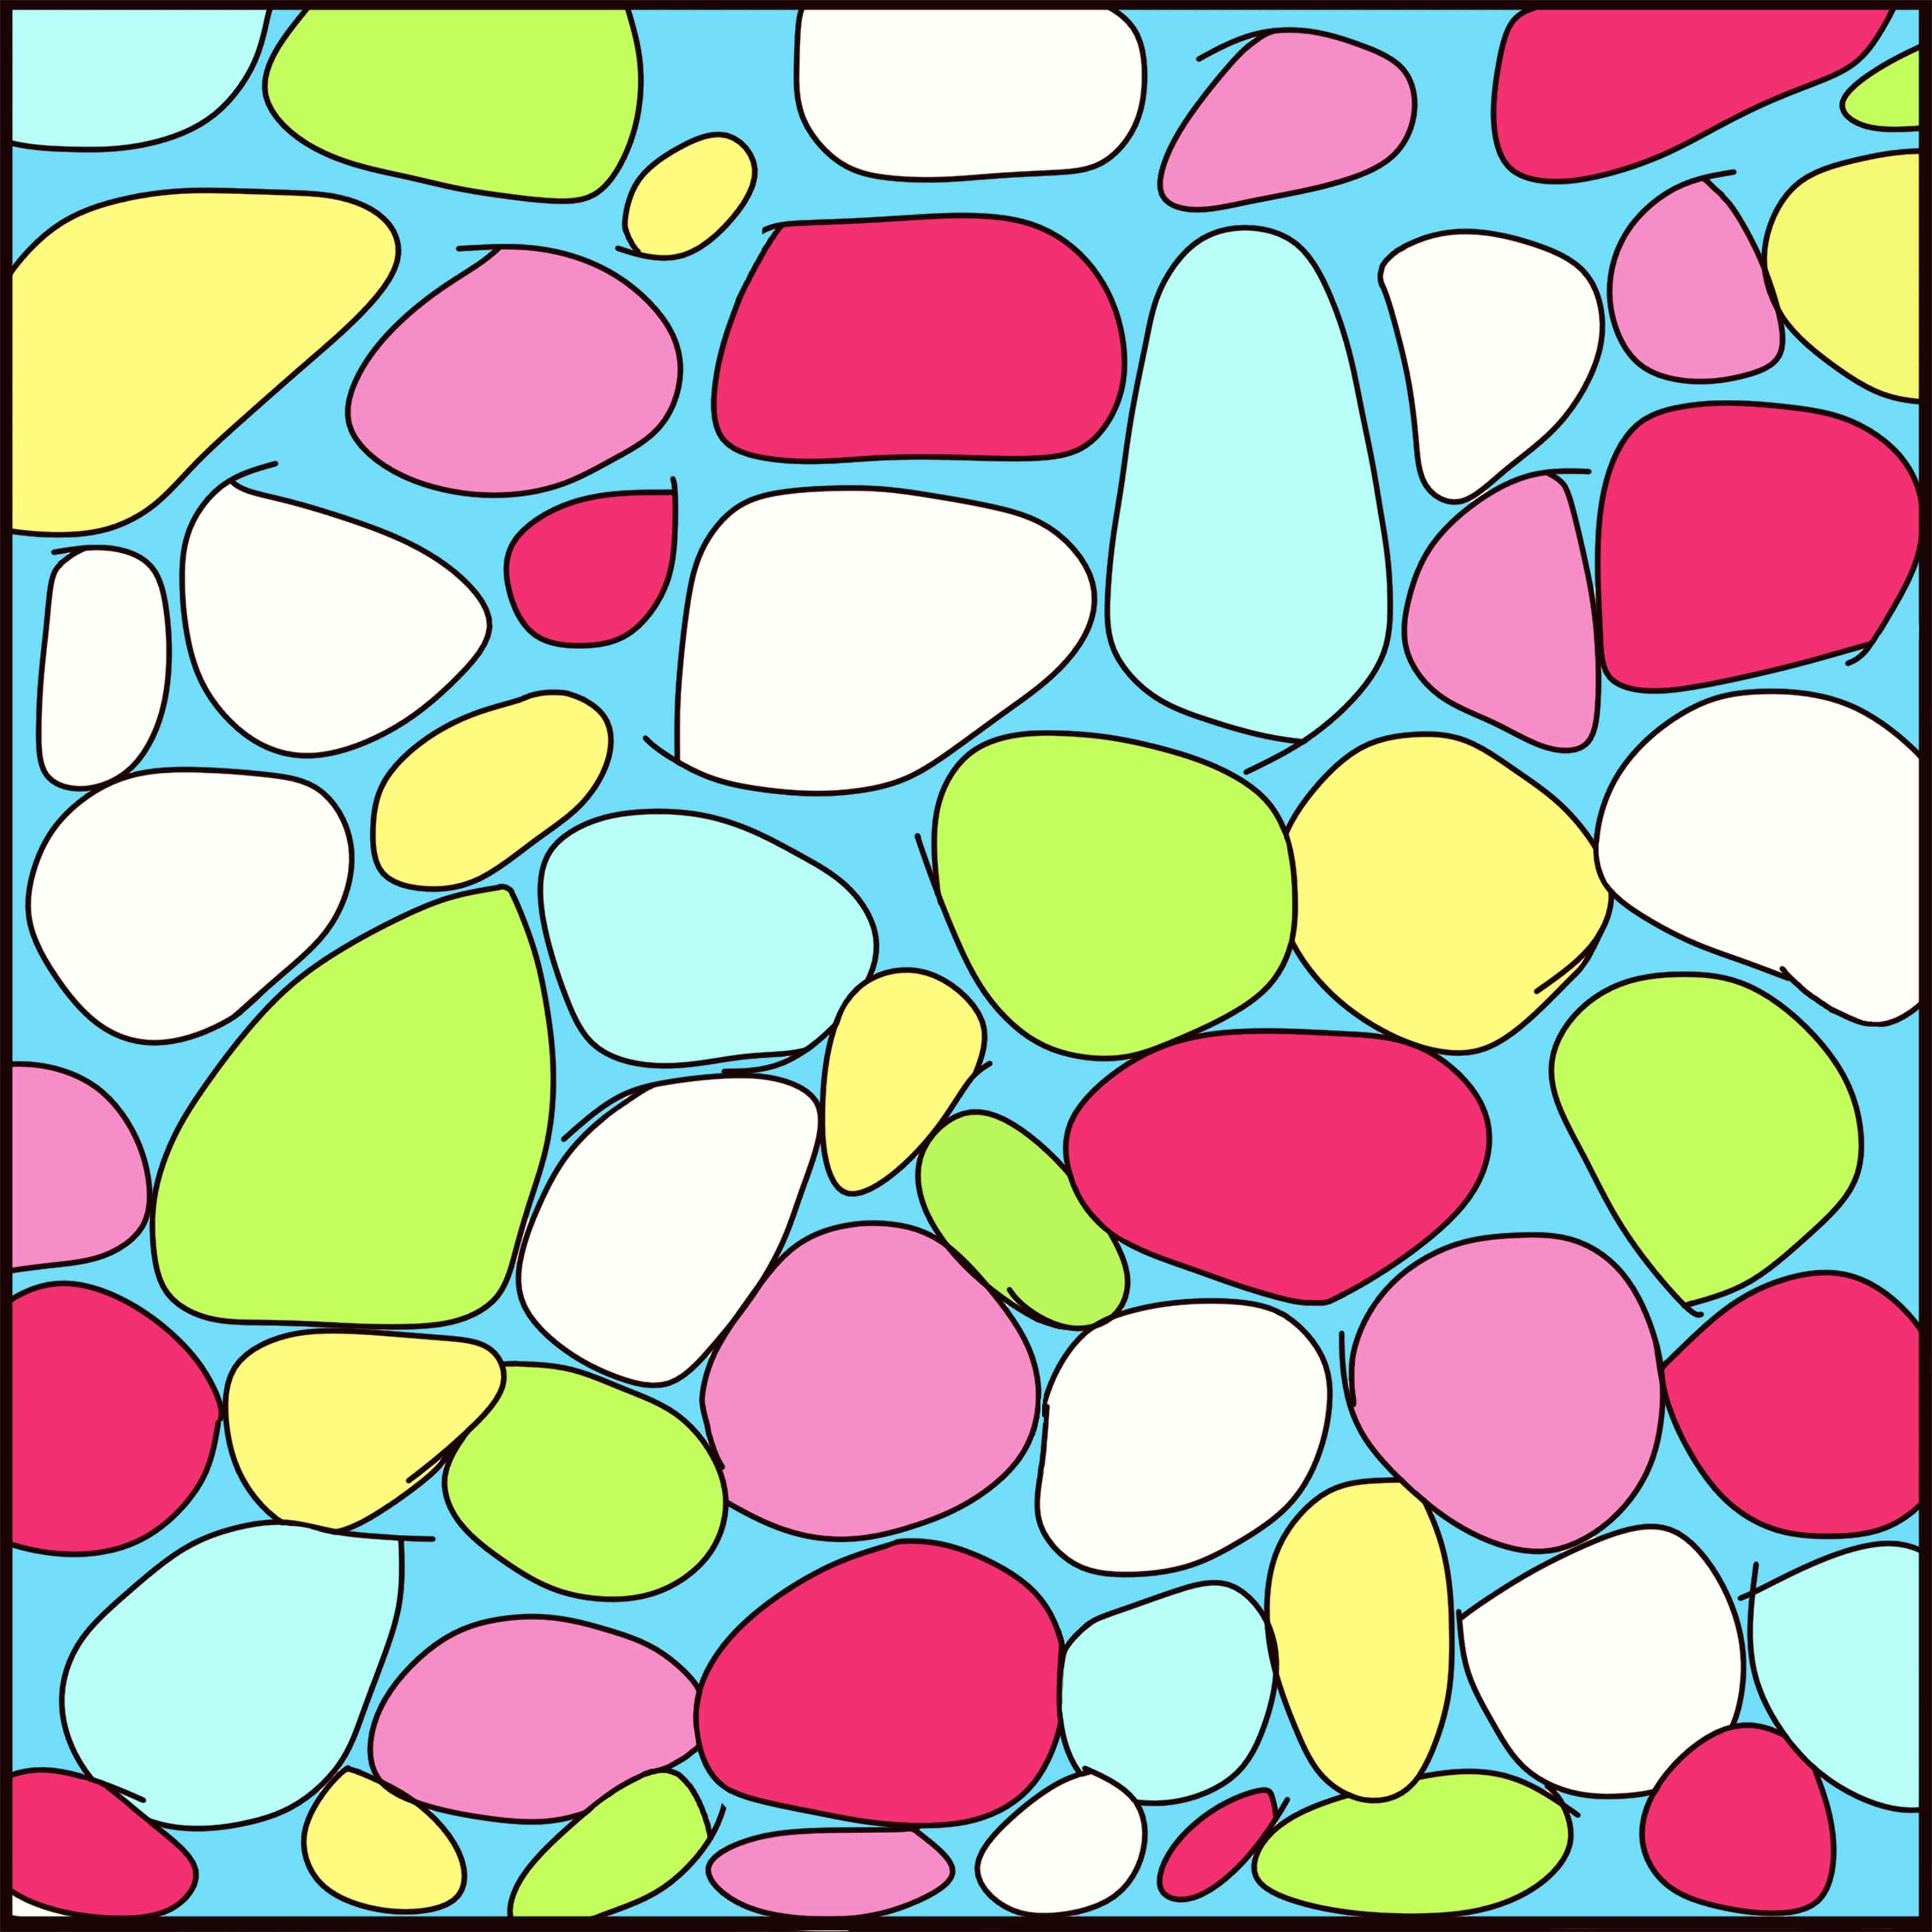 art every day number 120 / digital / pattern / the pebble beach